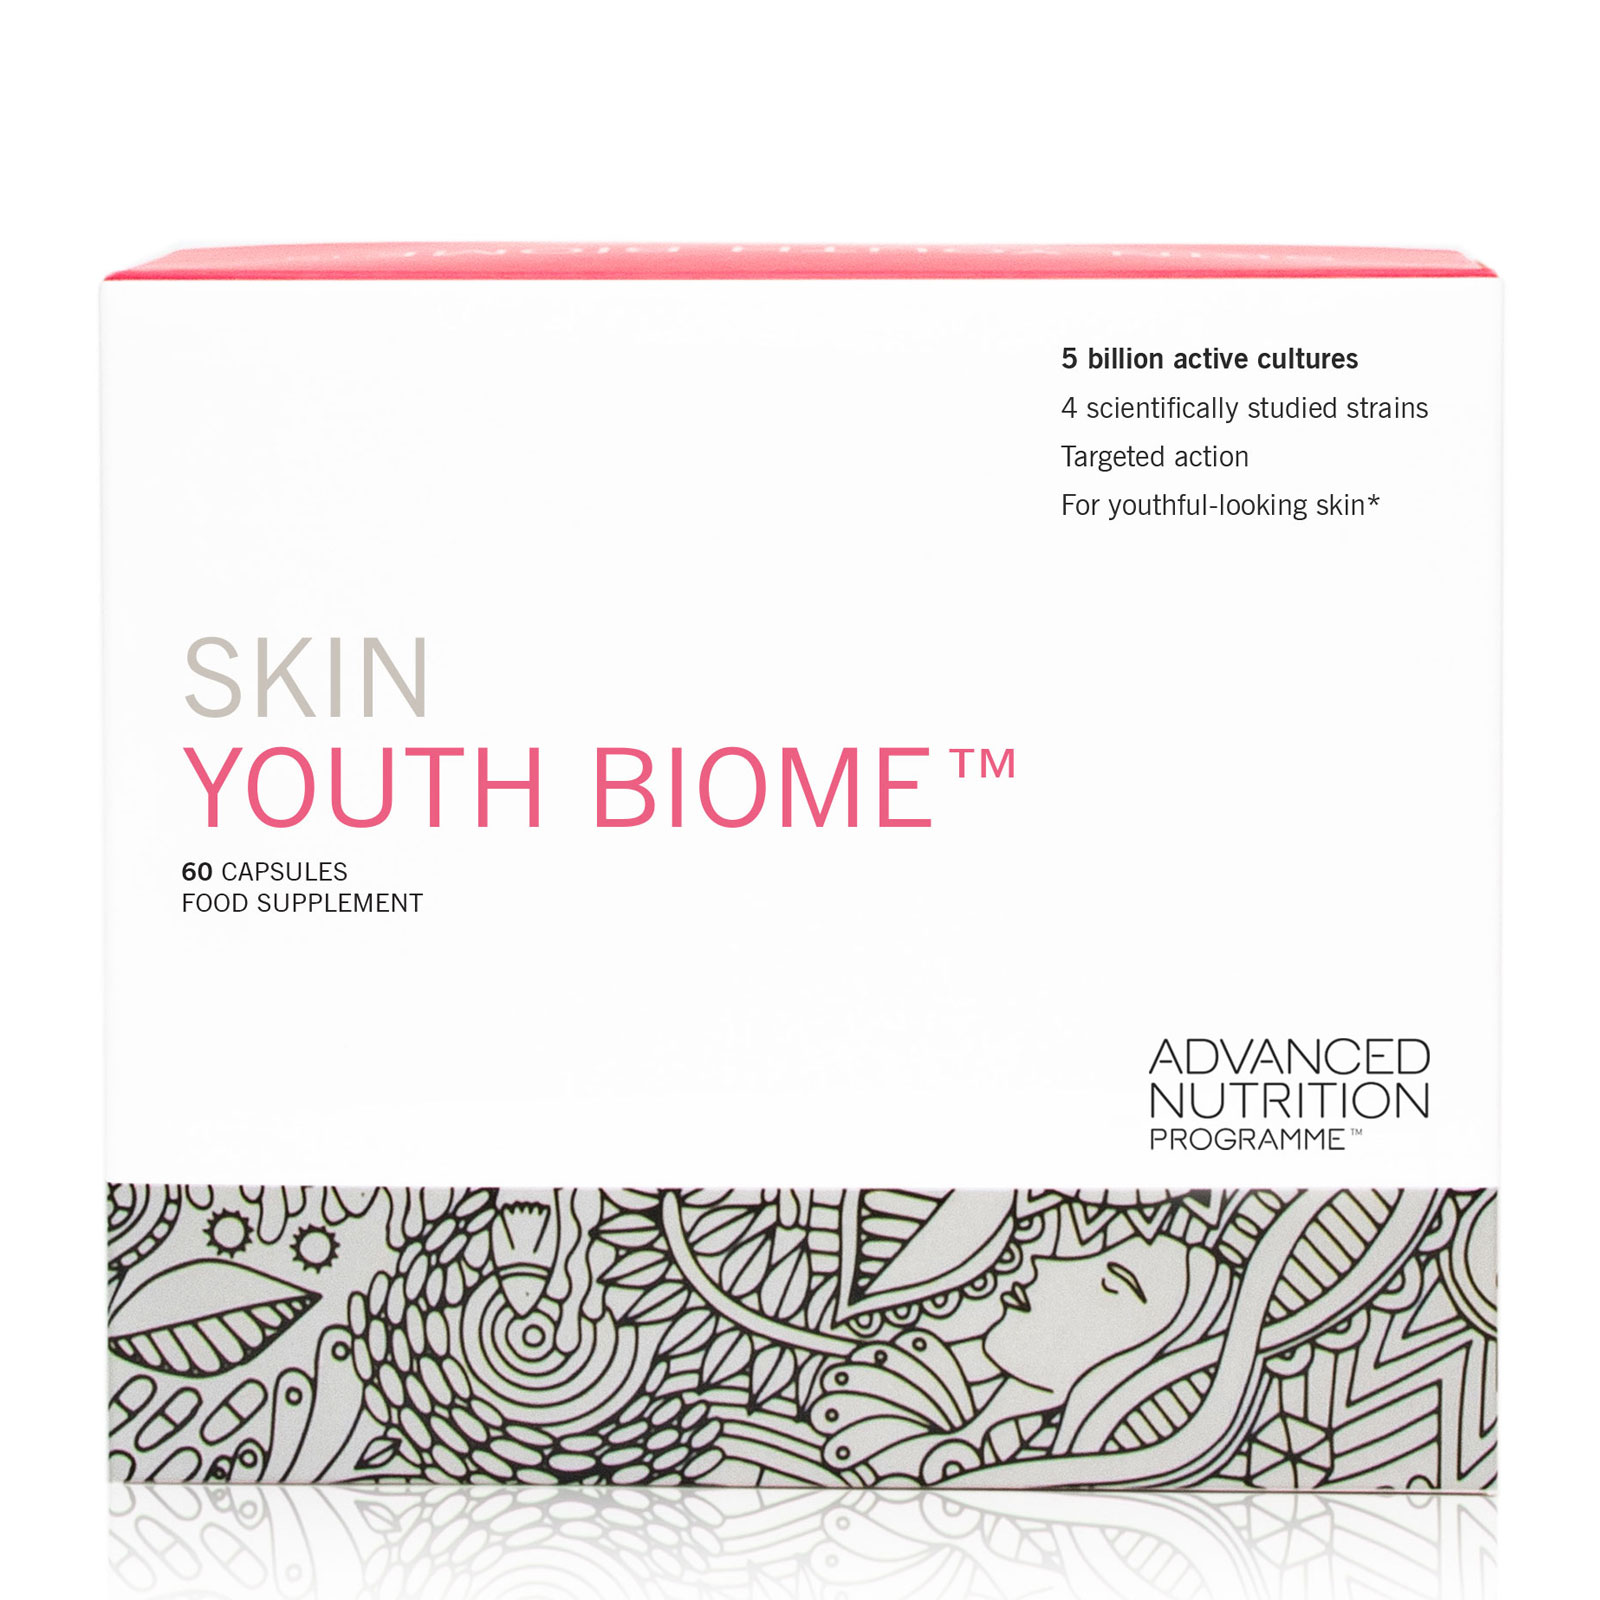 Advanced Nutrition Programme Skin Youth Biome X 60 Capsules